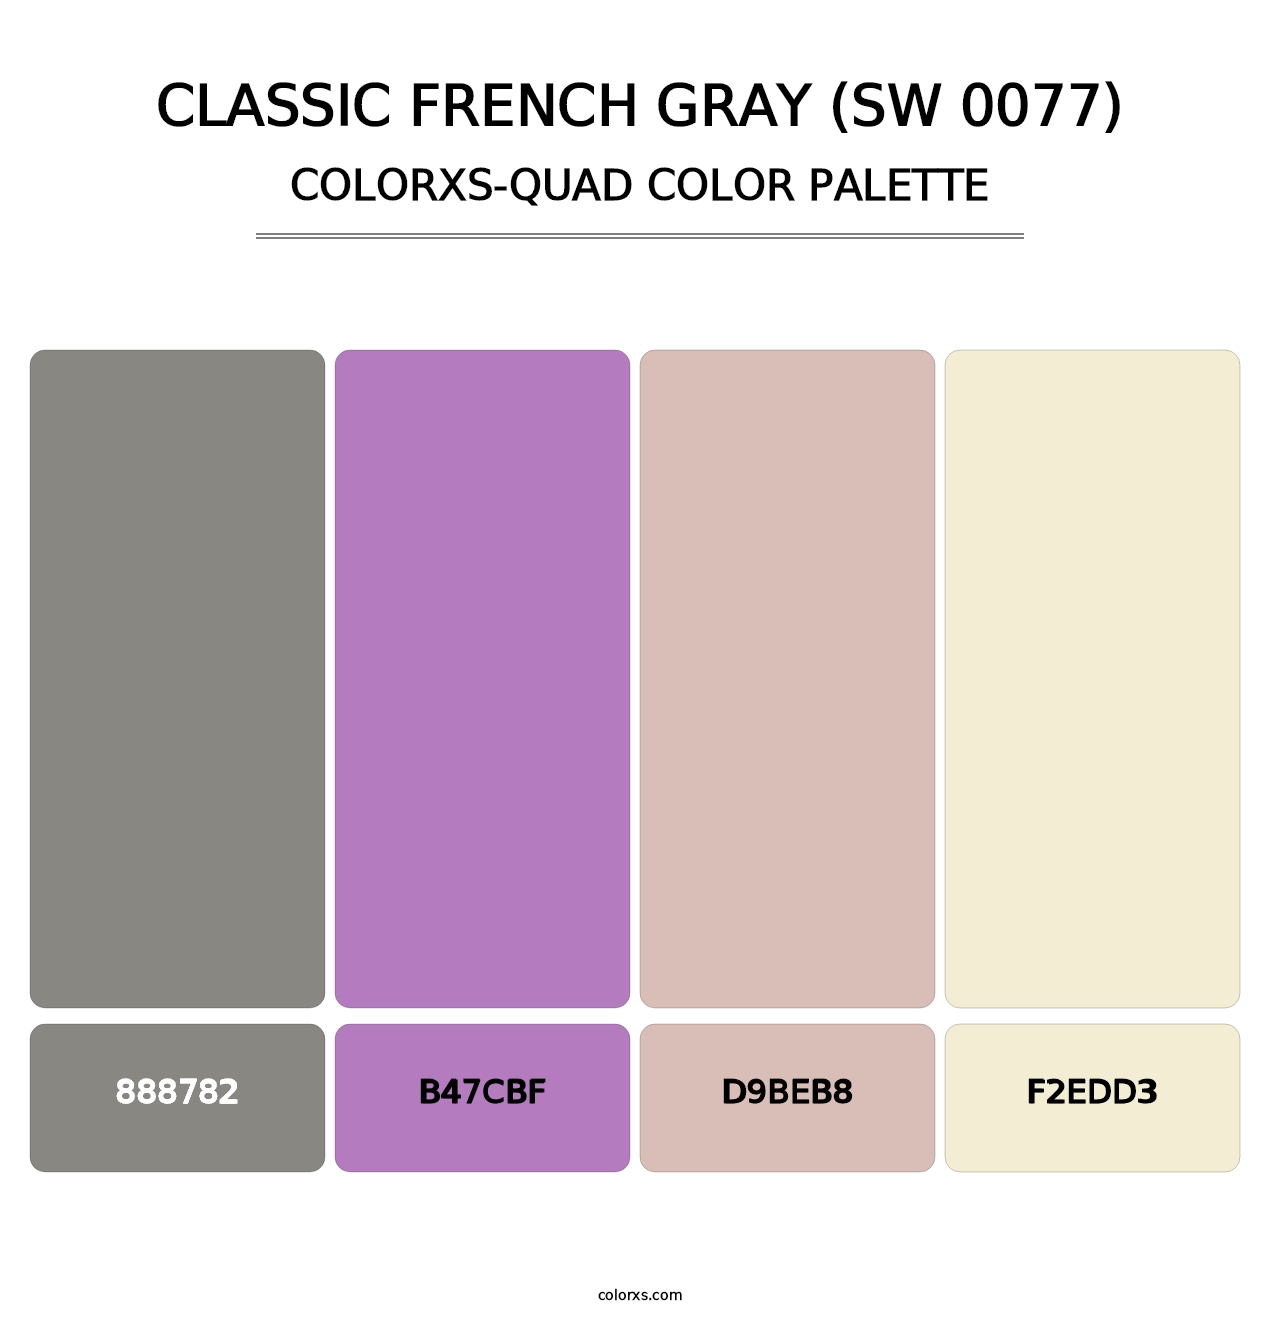 Classic French Gray (SW 0077) - Colorxs Quad Palette